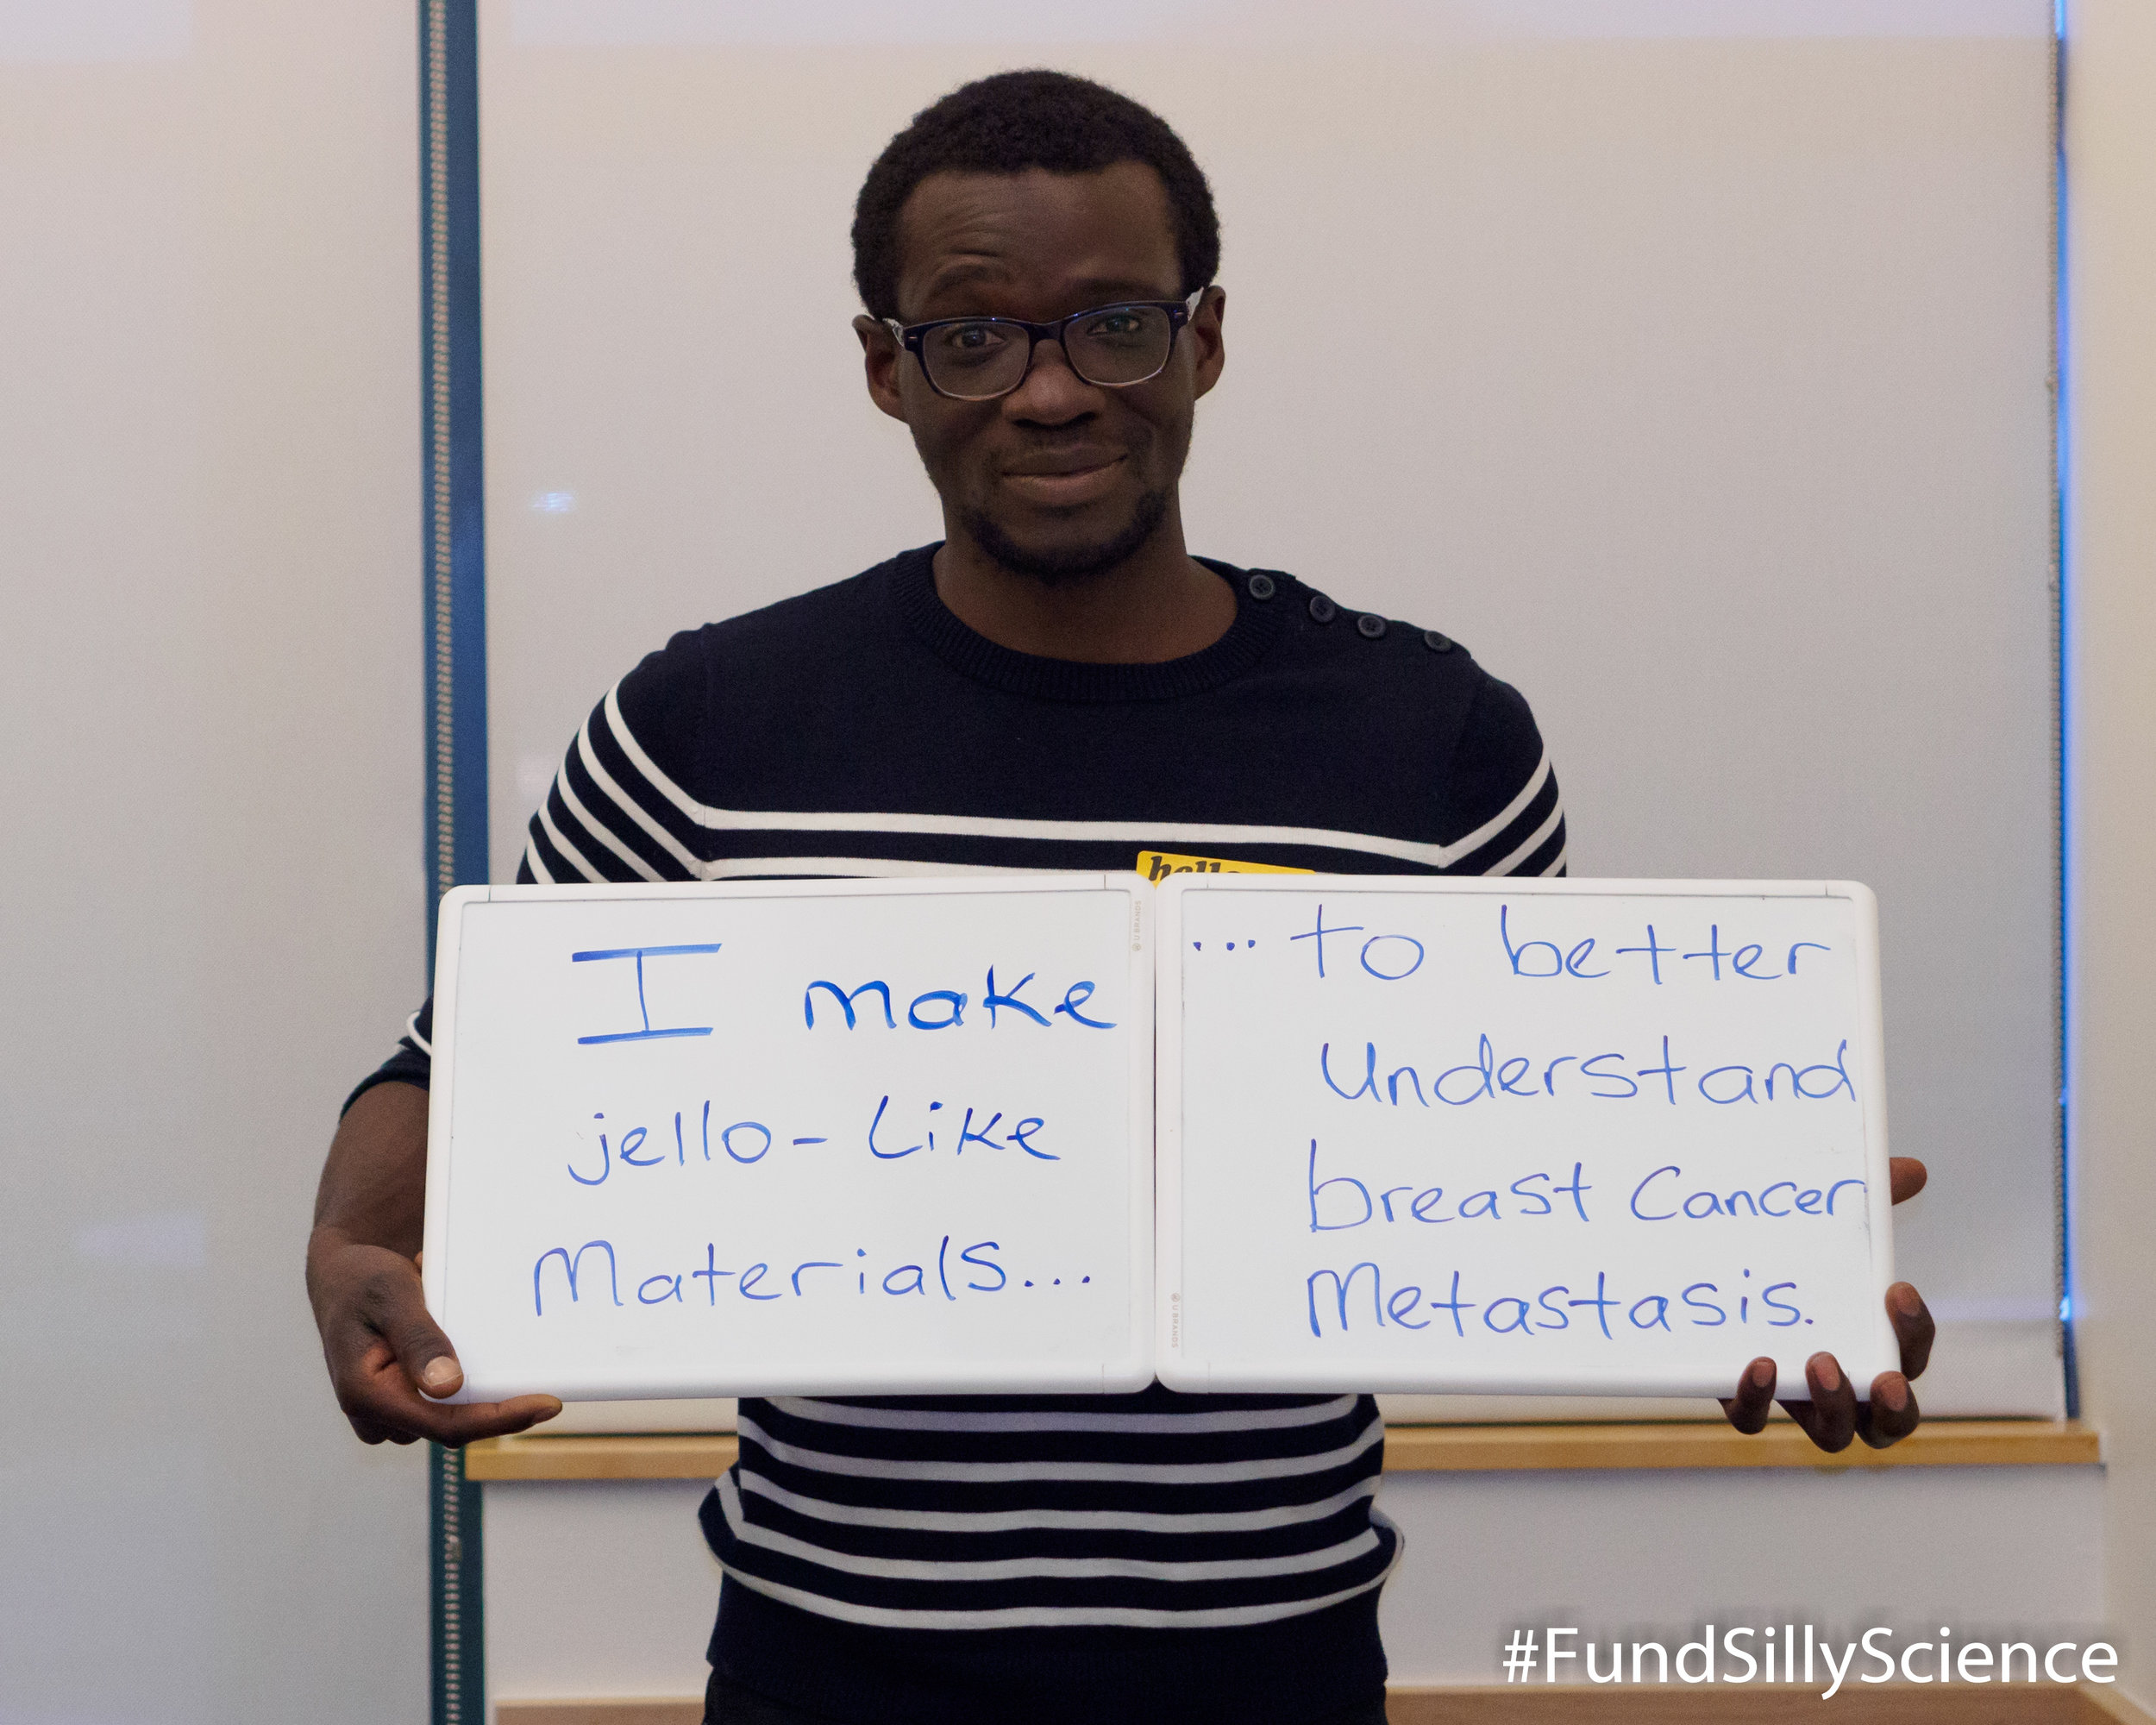  This is Kolade, a graduate student at Stanford. “90% of cancer deaths are due to metastasis. The mechanical properties of breast tumor environments are surprisingly similar to Jello. We use our materials to understand how cancer cells move through t